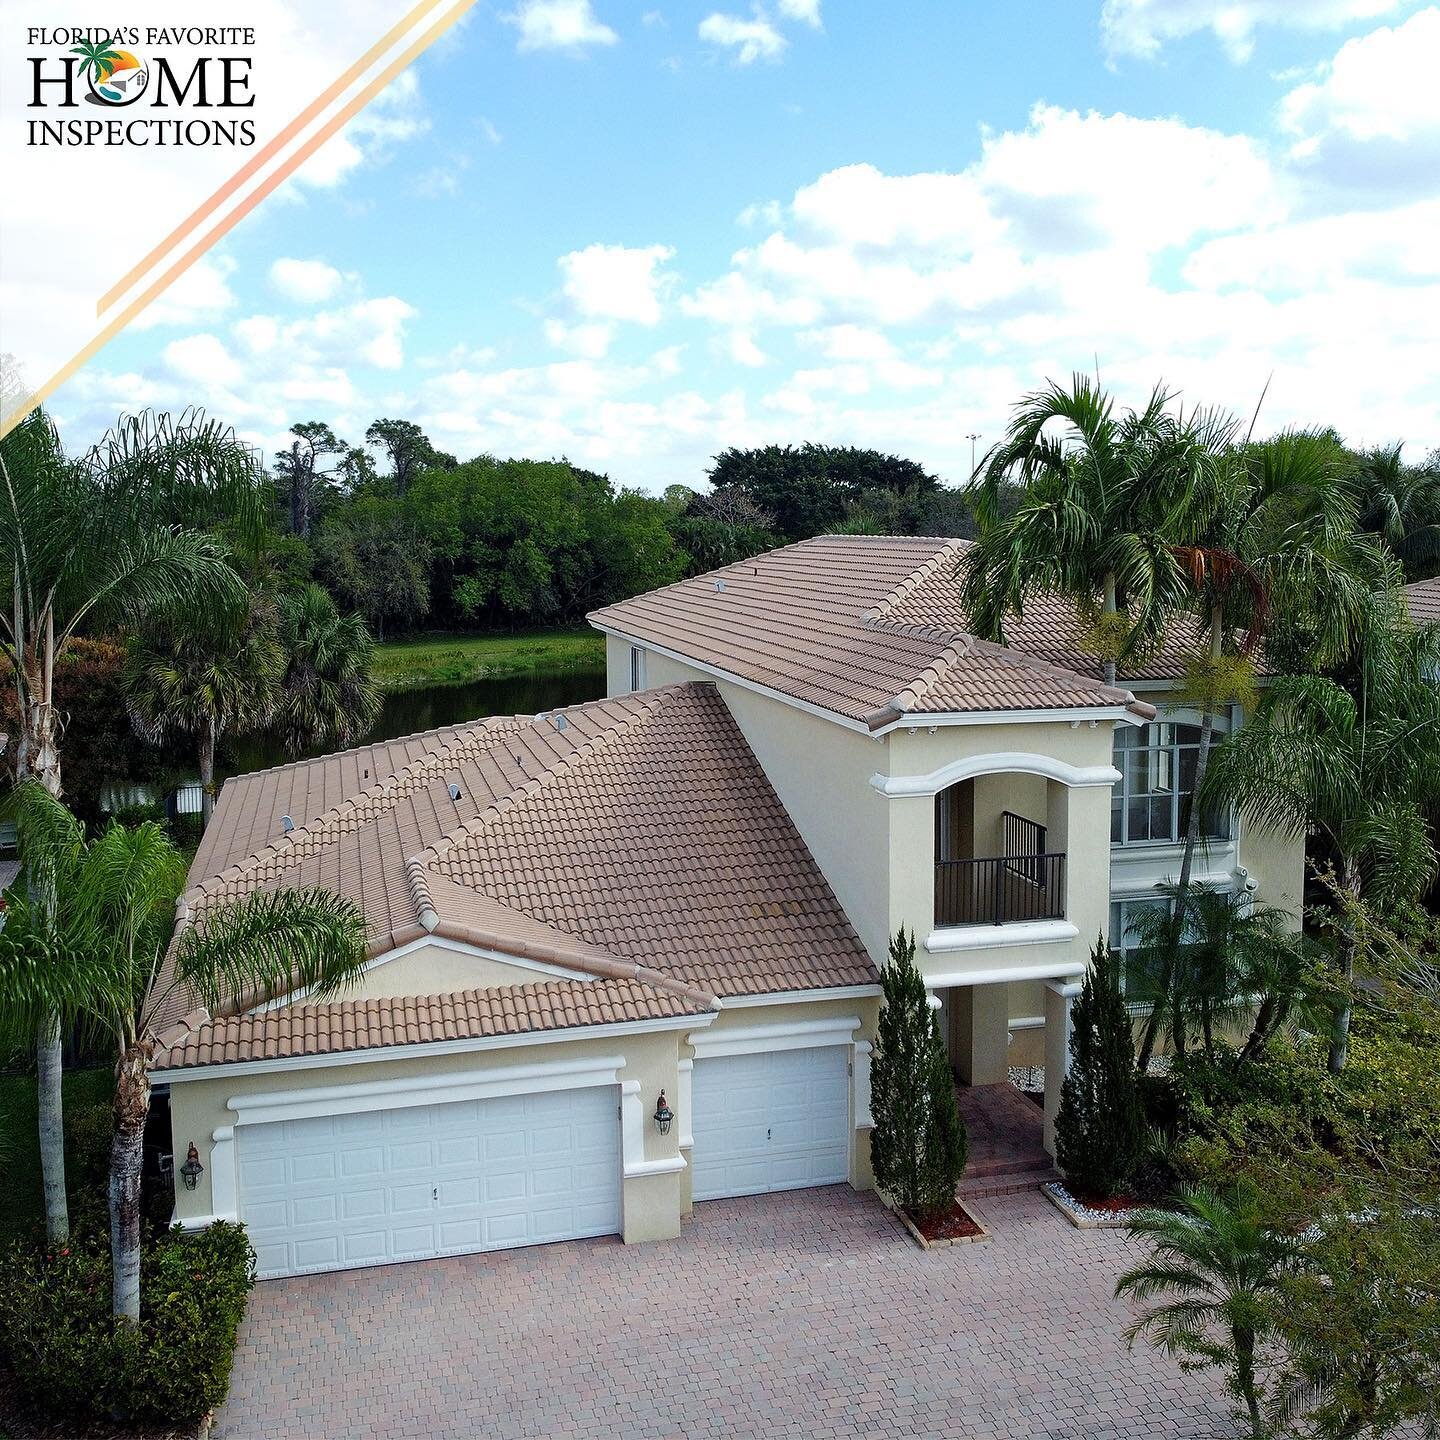 Home inspection in Lake Worth, Florida!